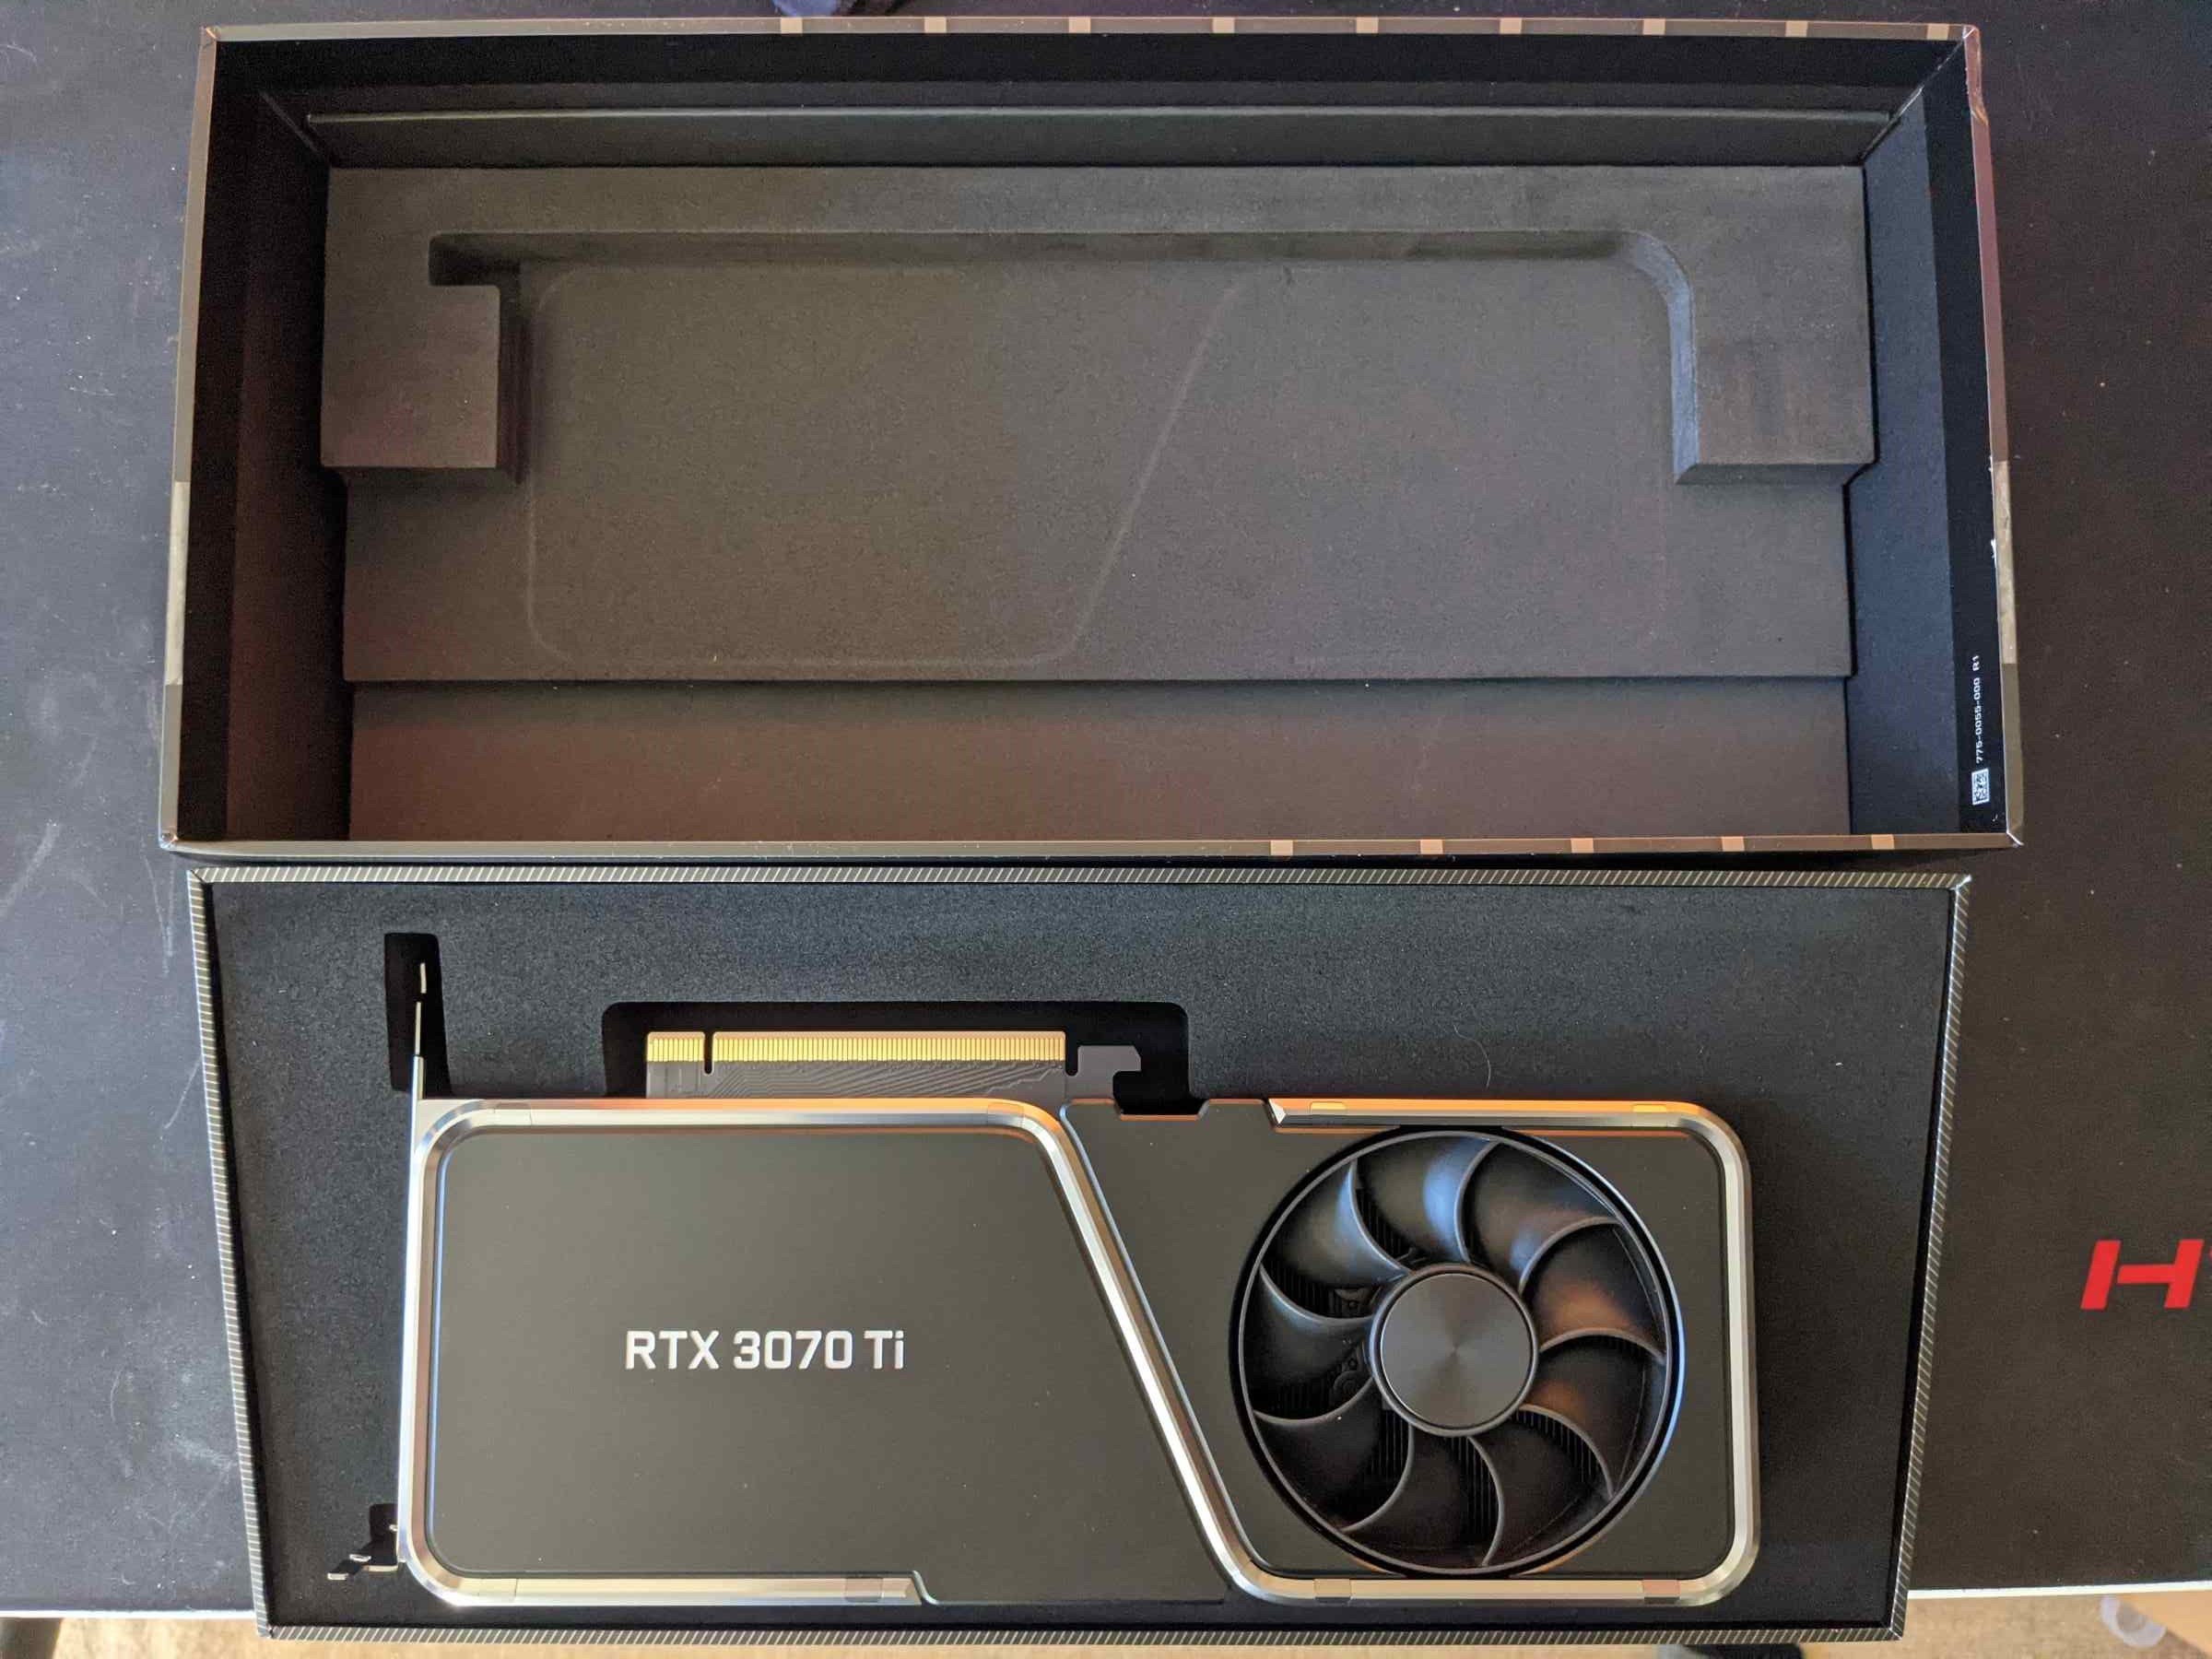 Nvidia GeForce RTX 3070 Ti review